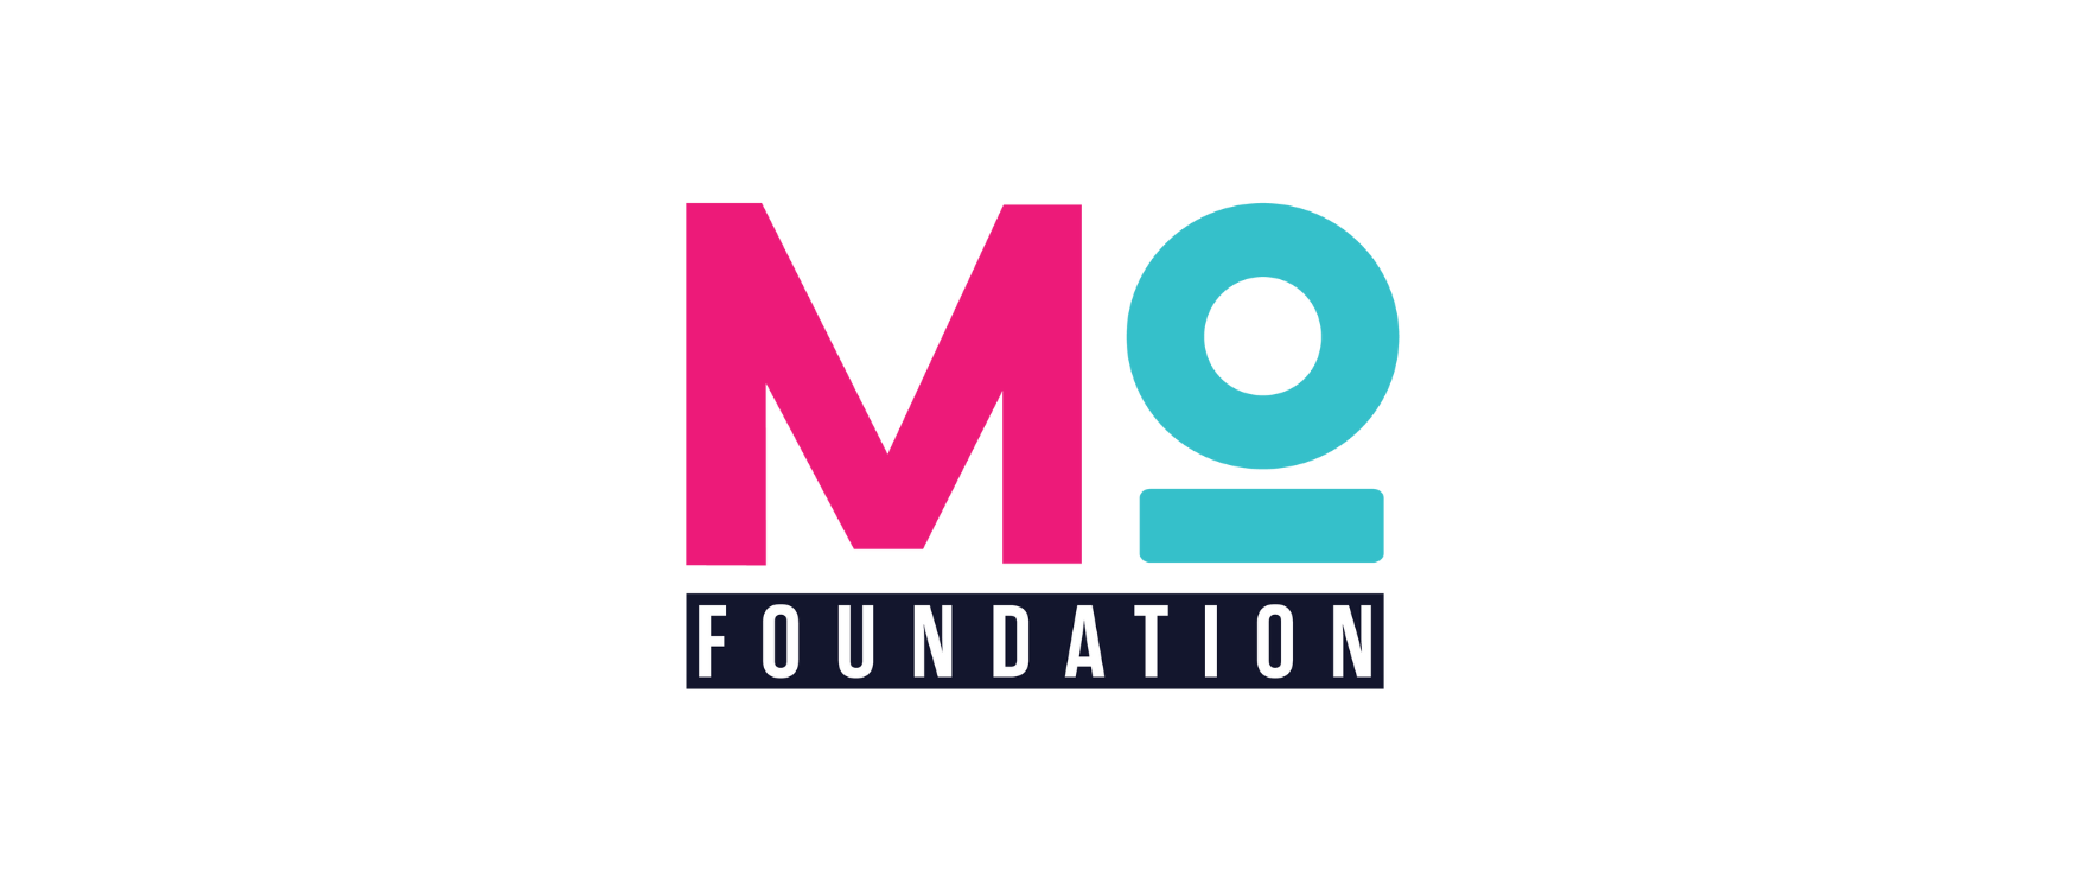 March On Foundation